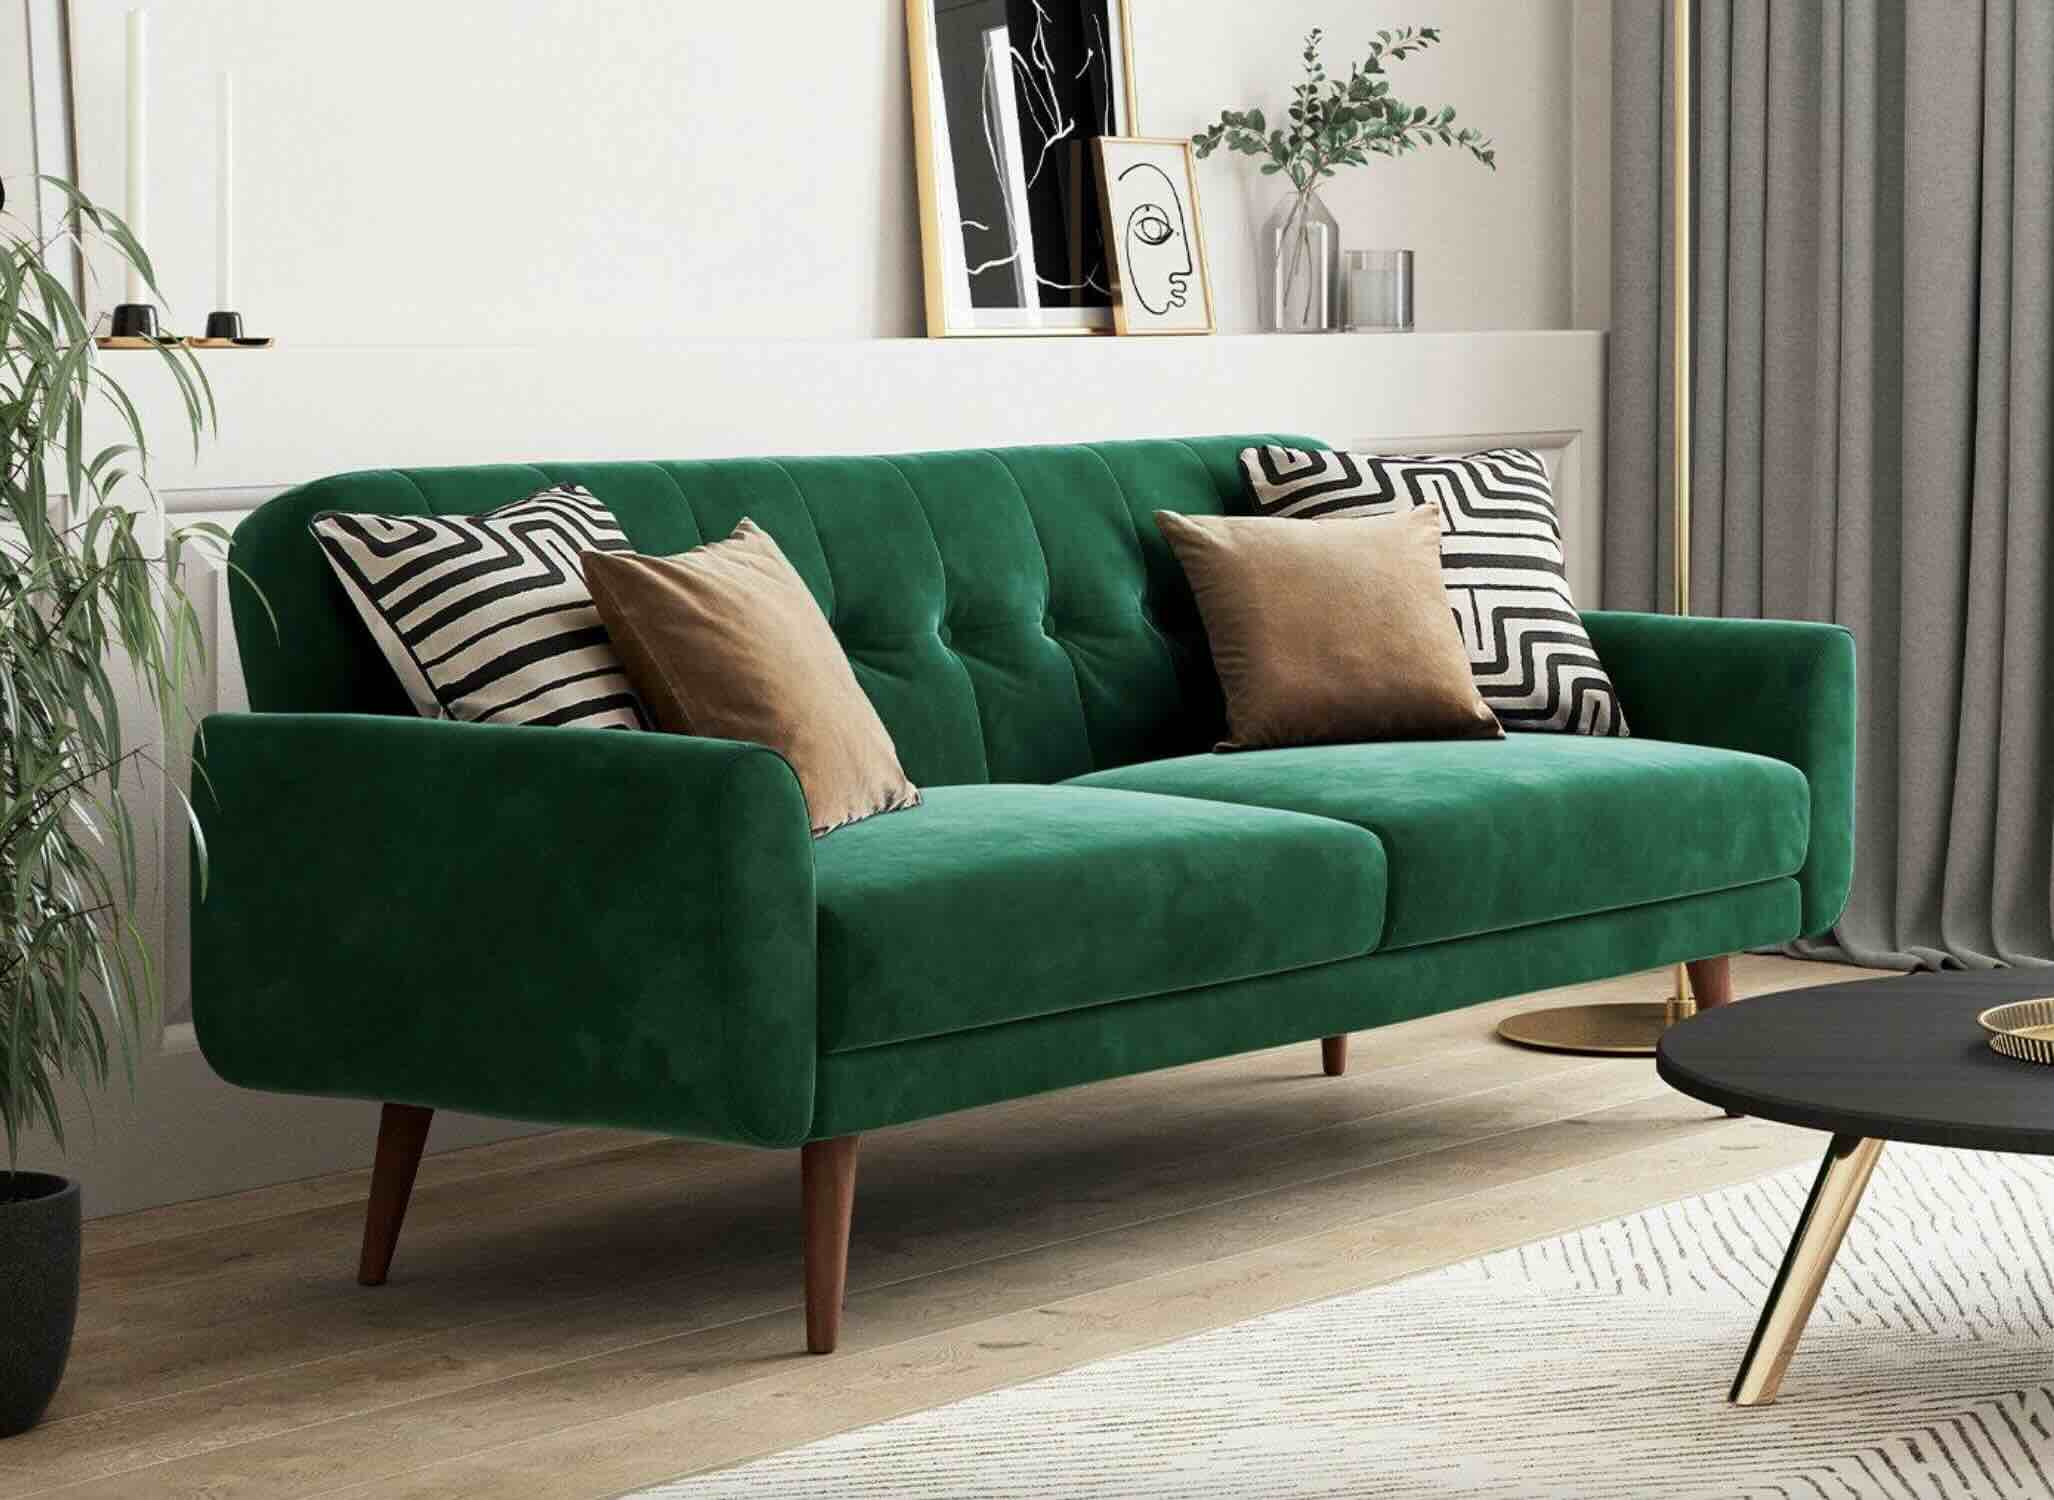 What Color Pillows Go With A Green Couch